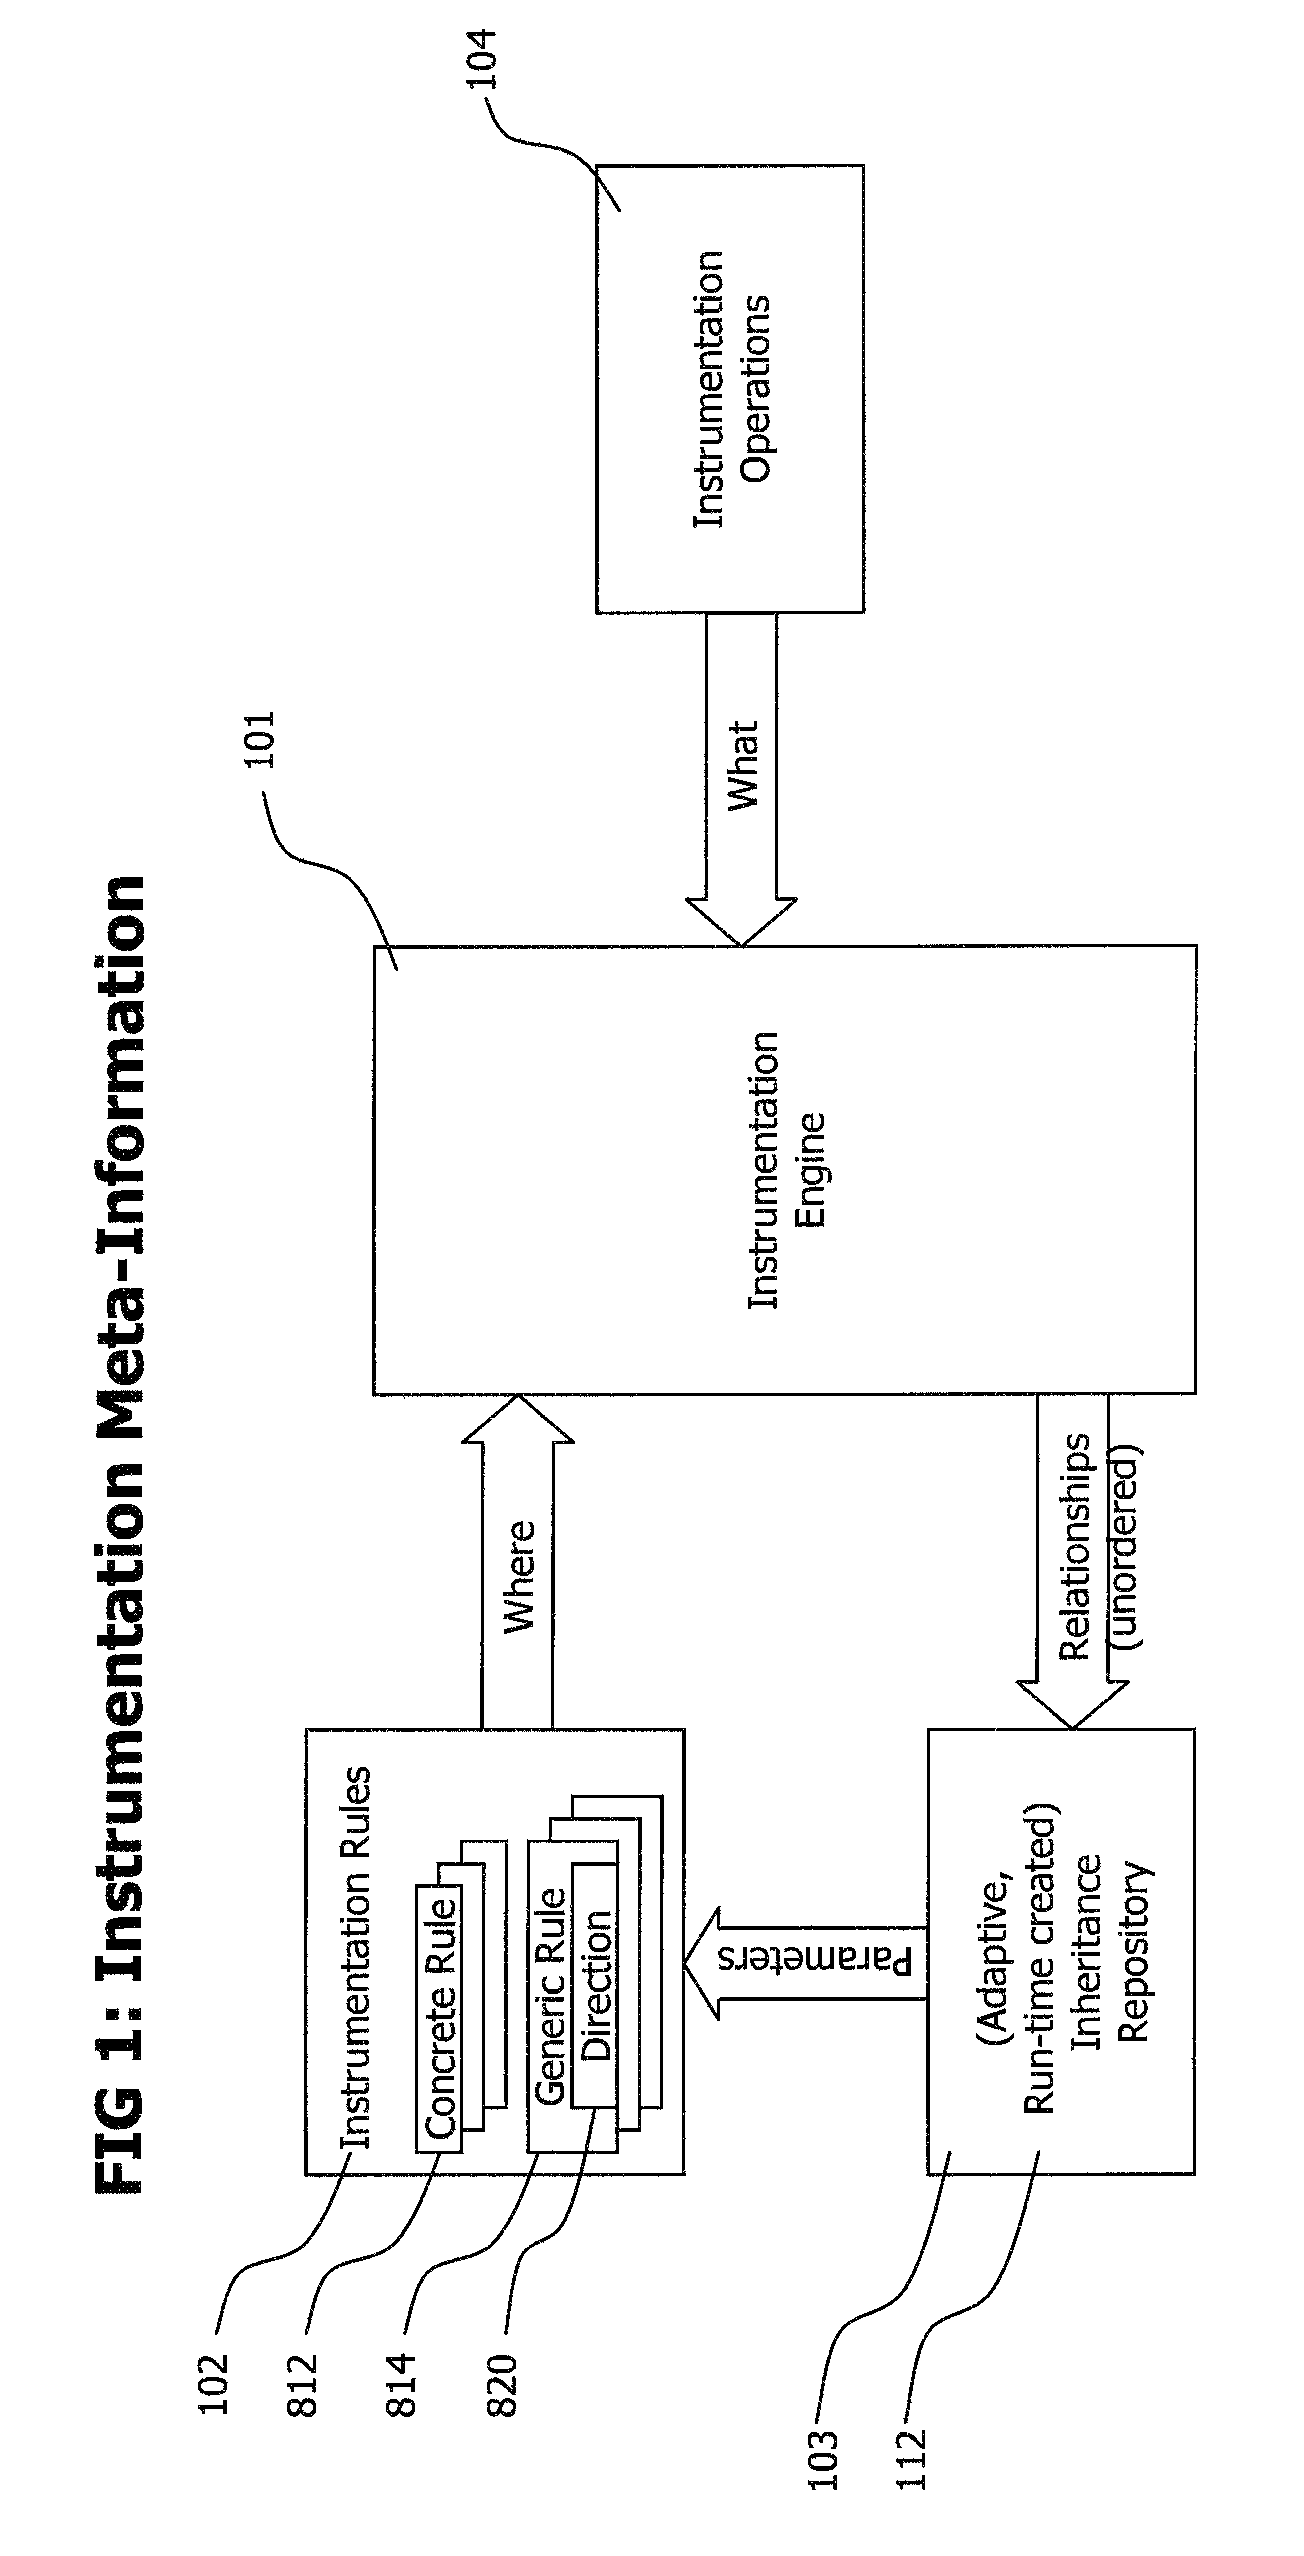 Method and system for adaptive, generic code instrumentation using run-time or load-time generated inheritance information for diagnosis and monitoring application performance and failure